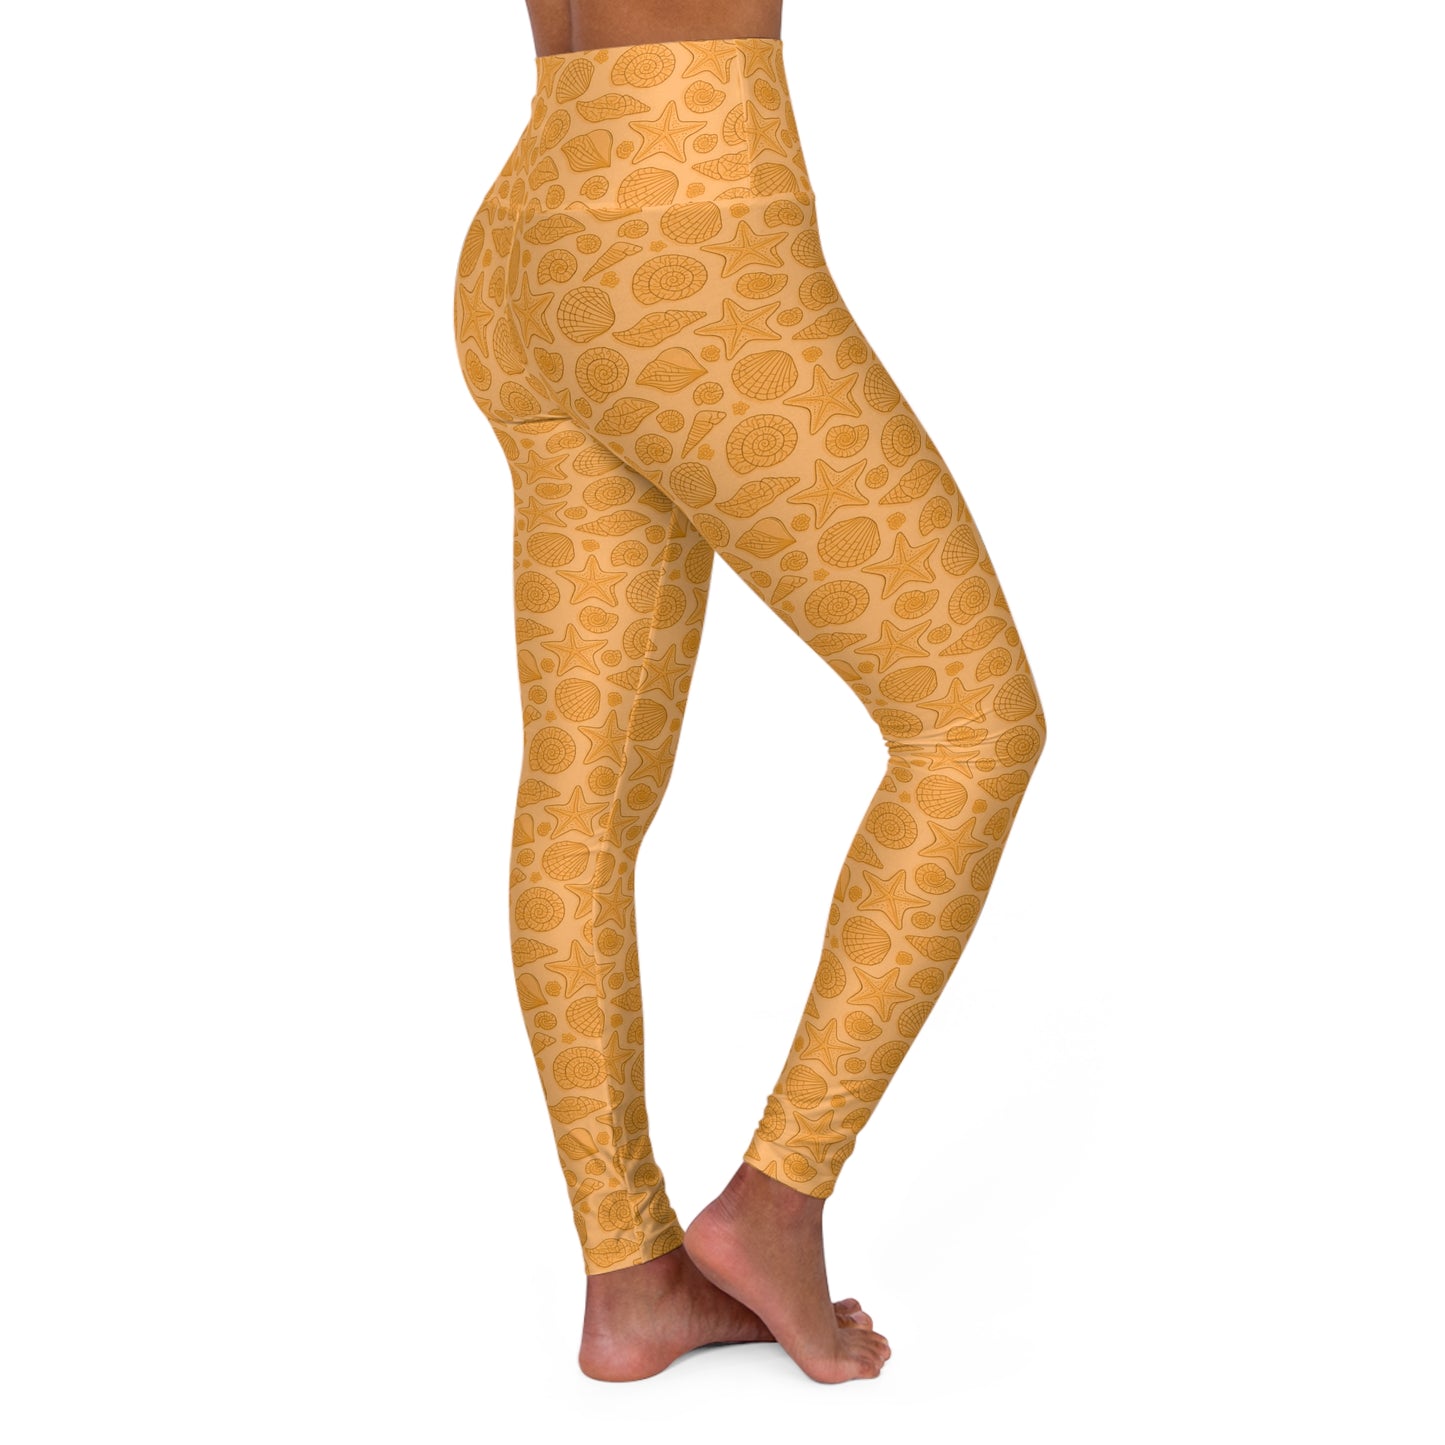 Dive into Enchantment with Mermaid Style Orange Starfish and Seashell Leggings Magical High Waisted Yoga Pants, Gym Workout Woman Activewear